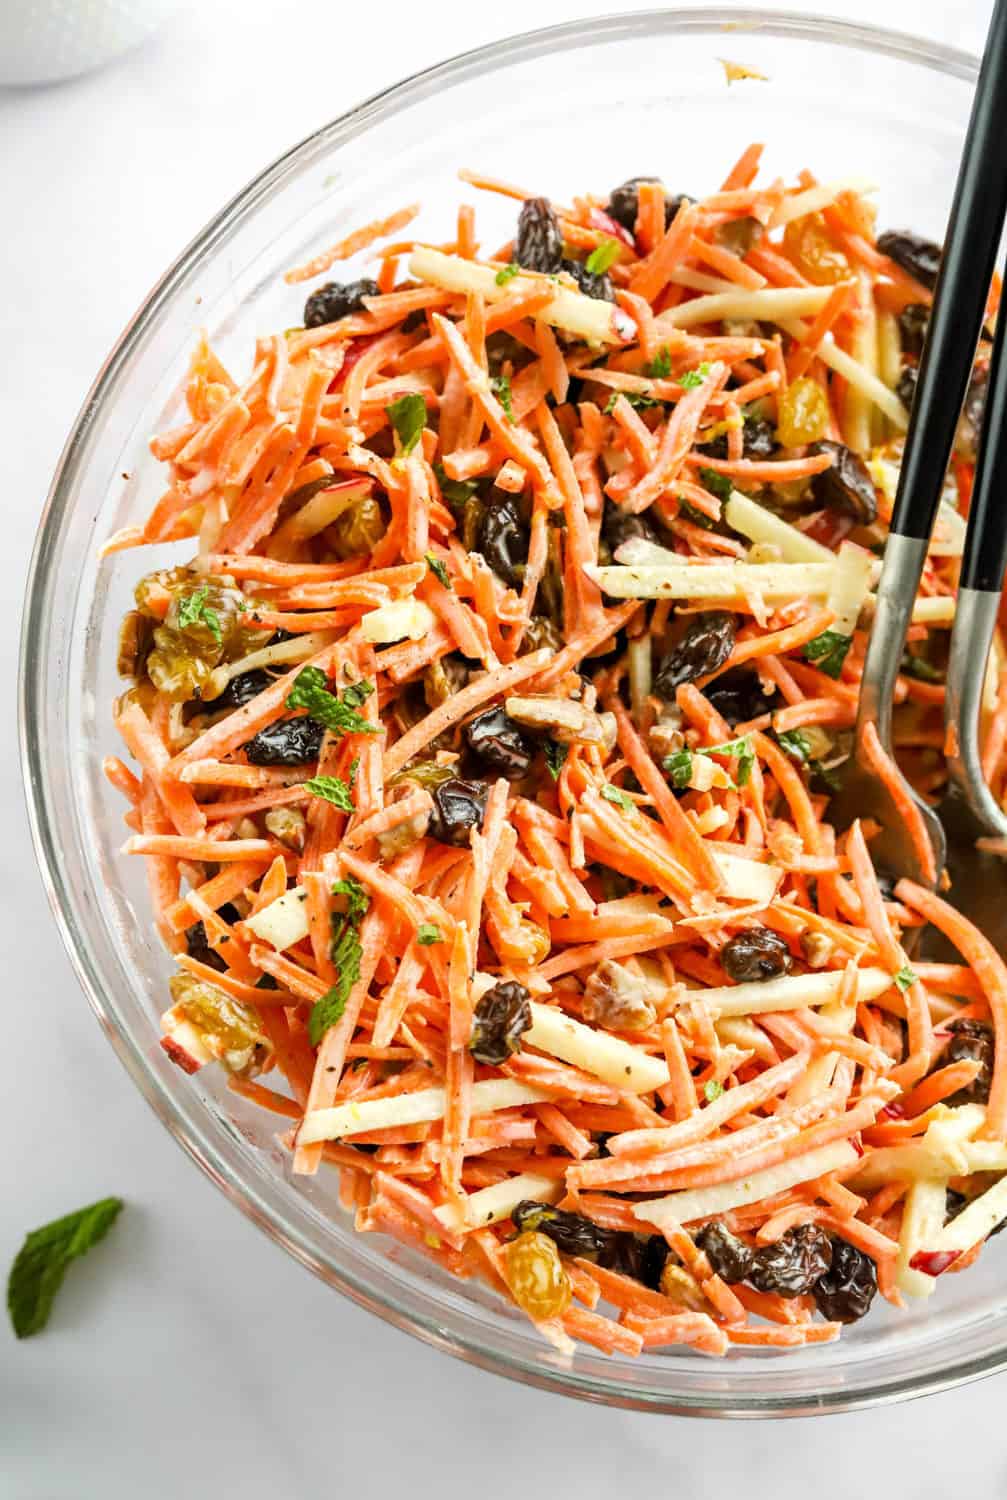 Shredded carrot salad in a glass bowl with raisins, nuts and mint with some shredded apple as well.  With black serving spoons in the bowl. 